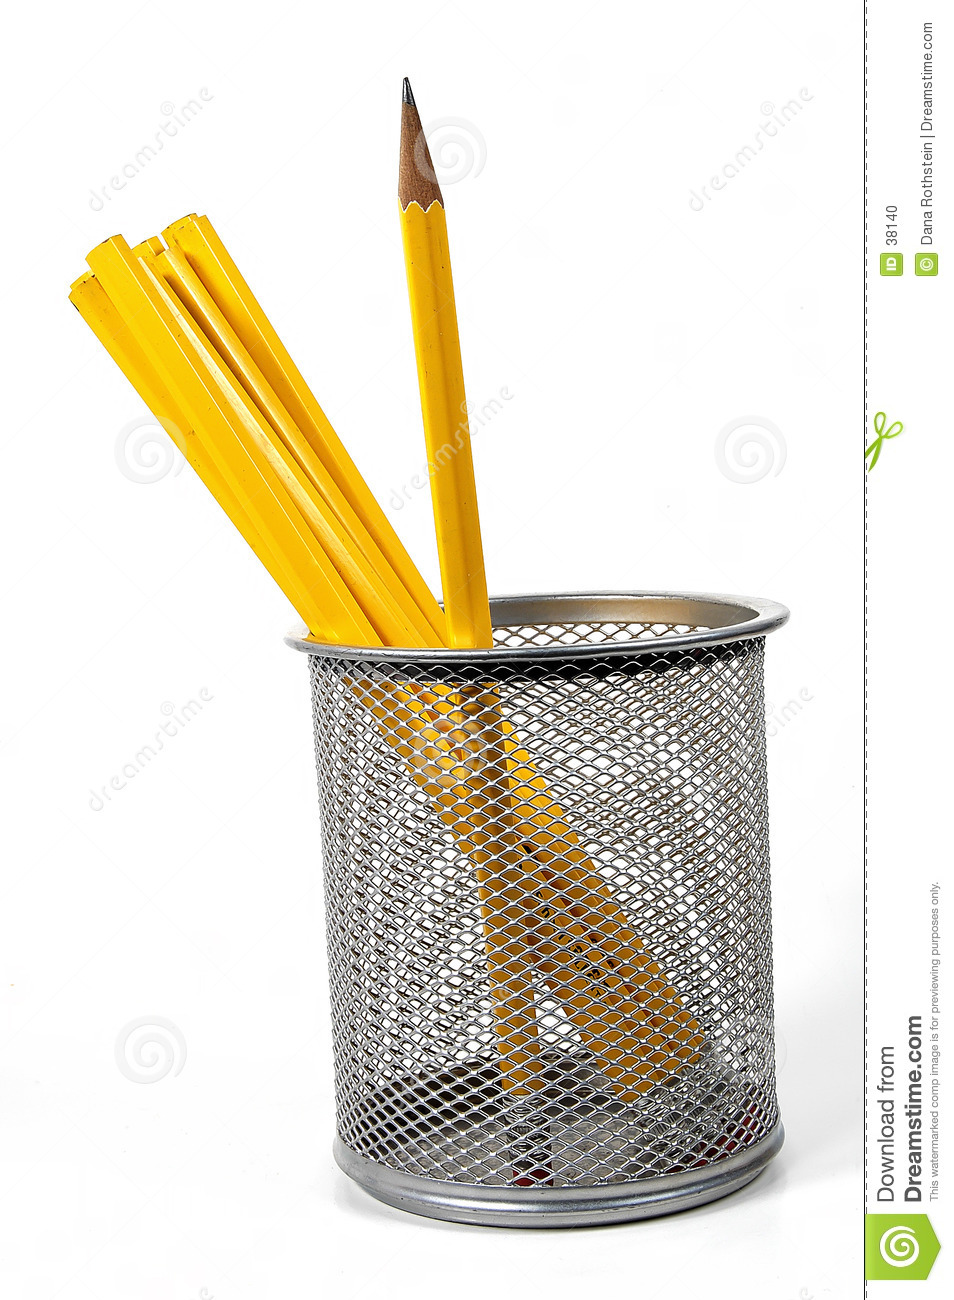 Photo Of Unsharpened Pencils And One Sharpend Pencil In A Cup 